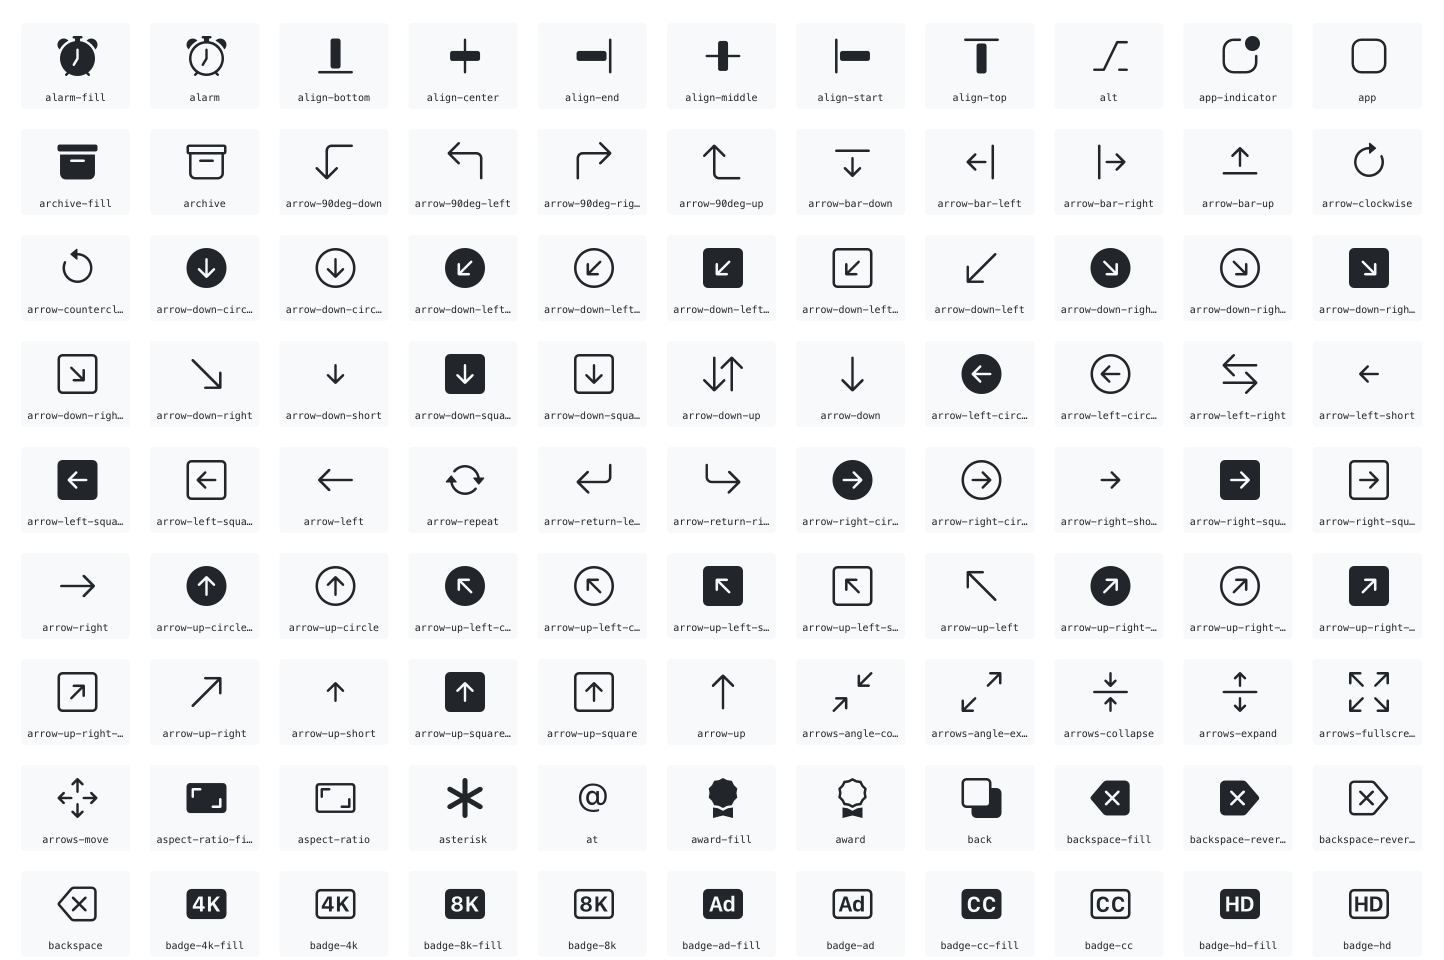 Icon fonts